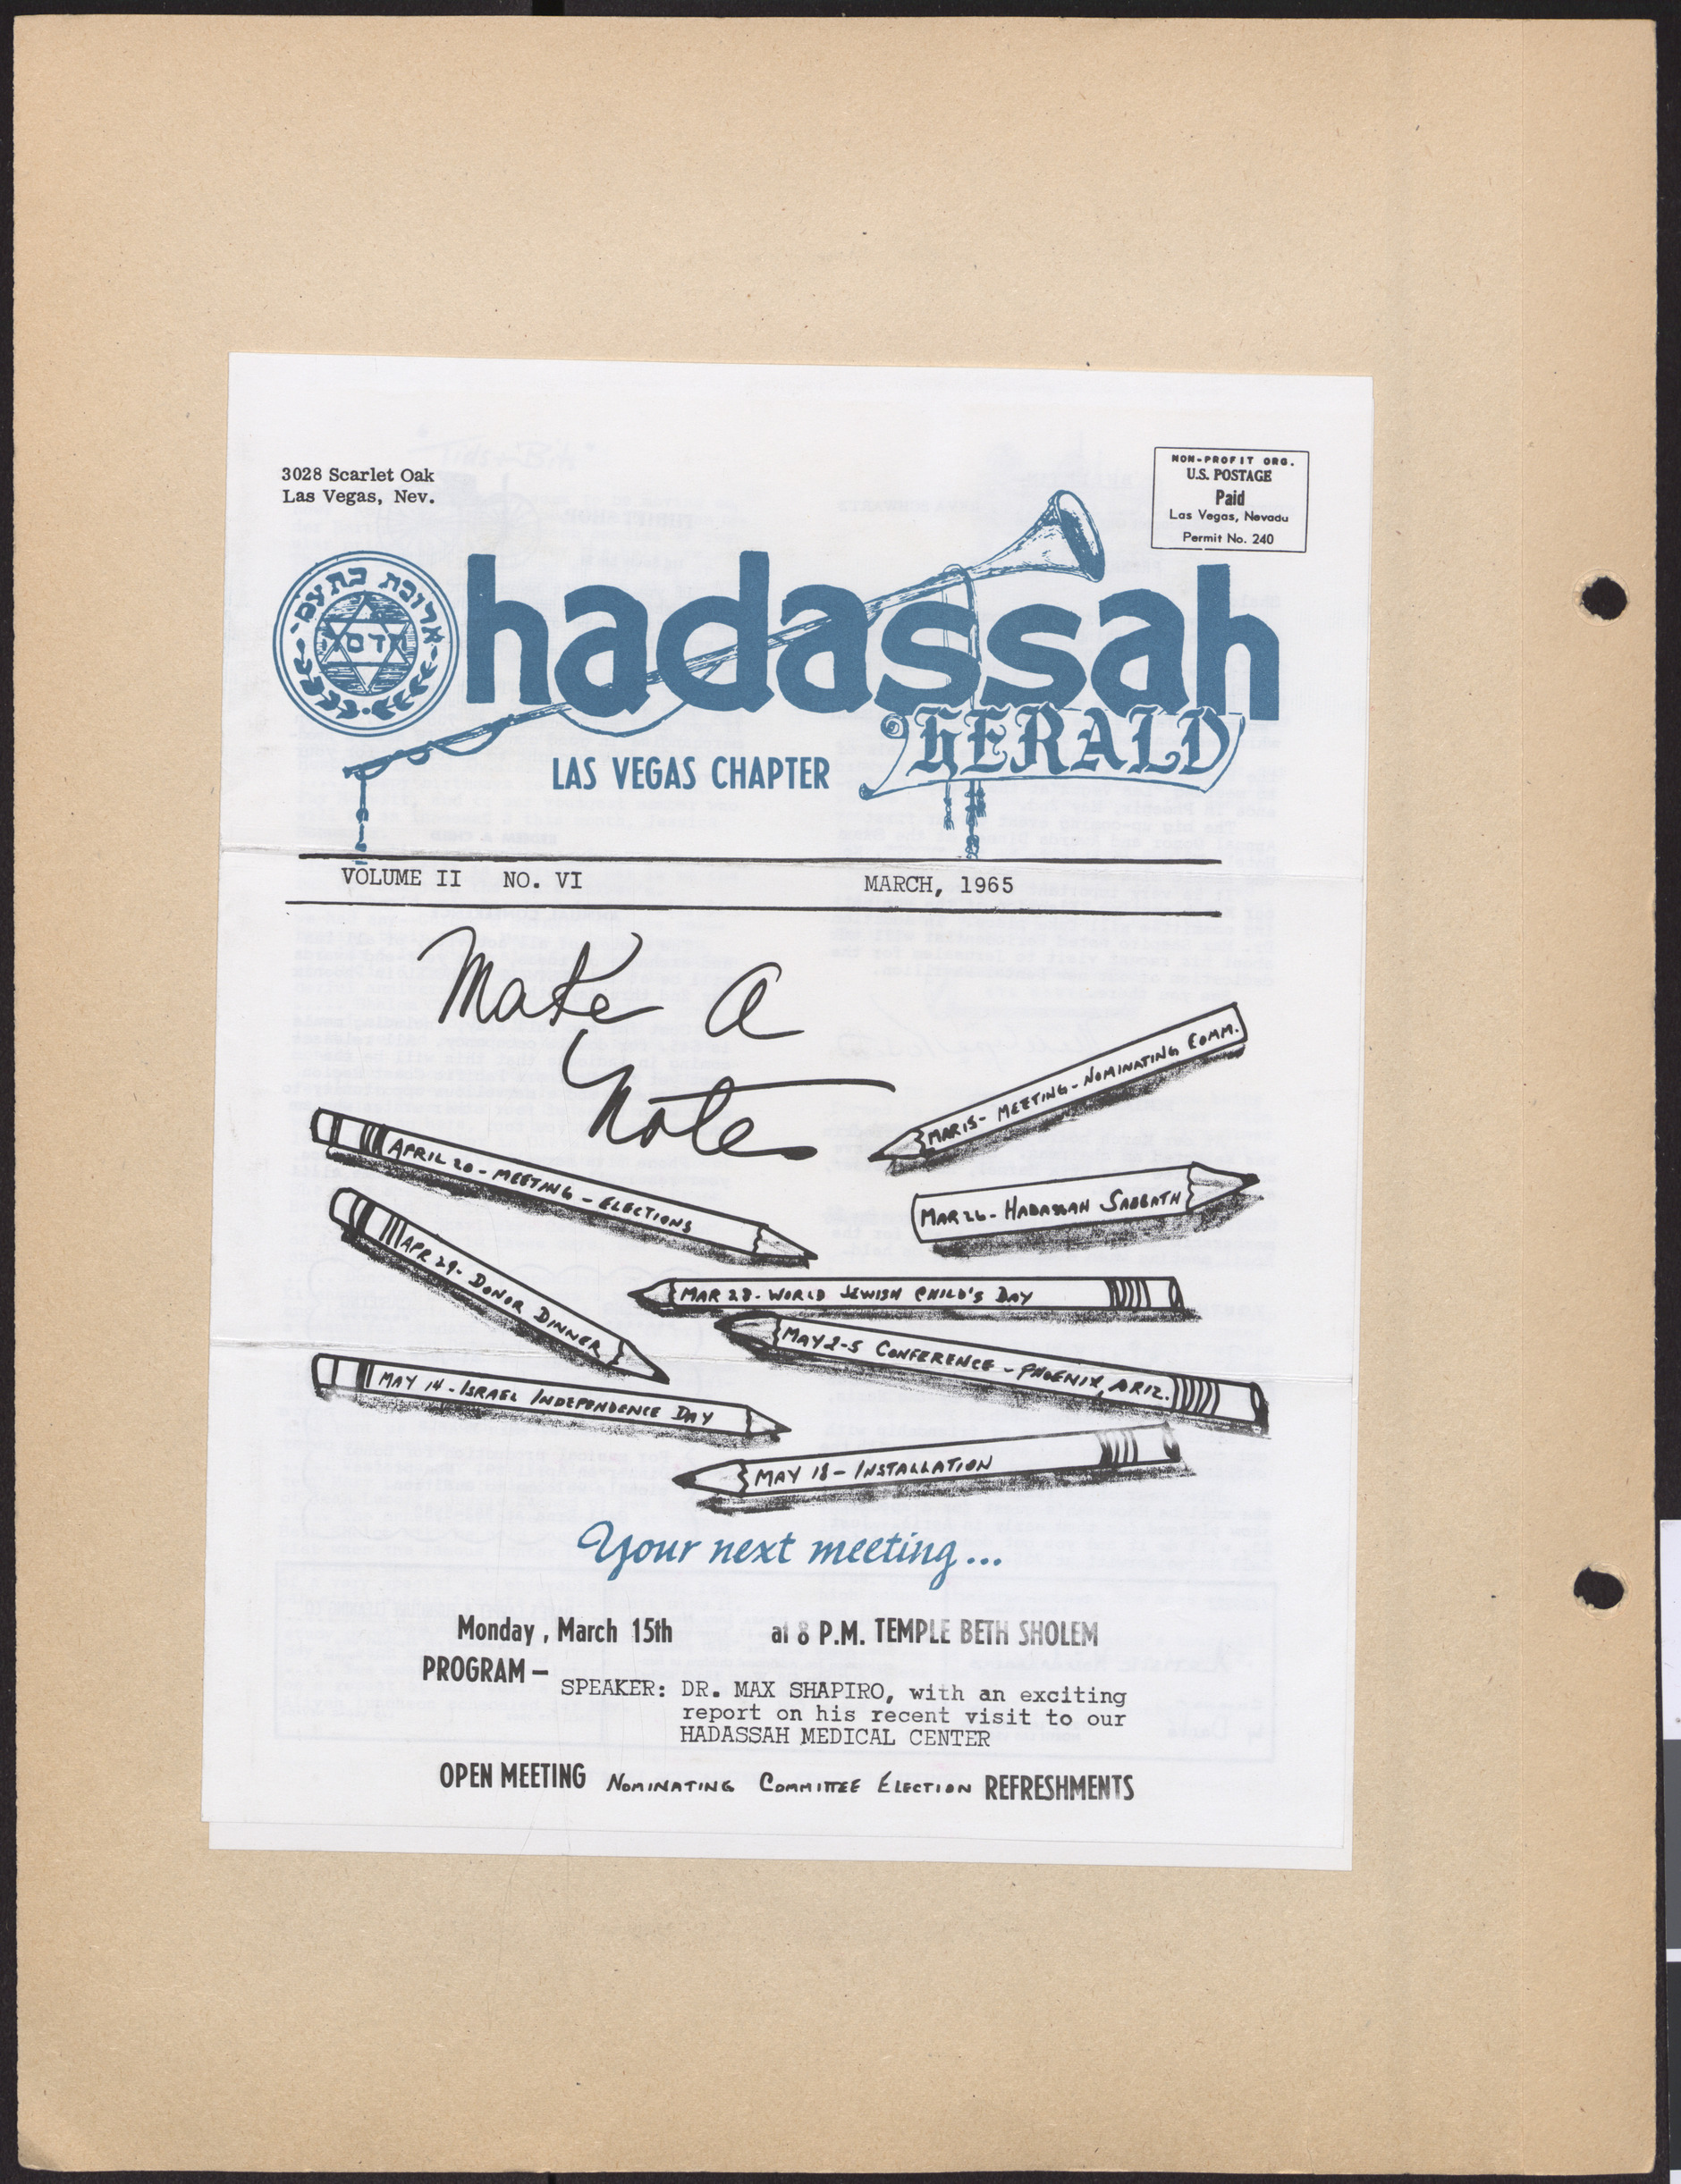 Hadassah Las Vegas Chapter newsletter, March 1965, cover